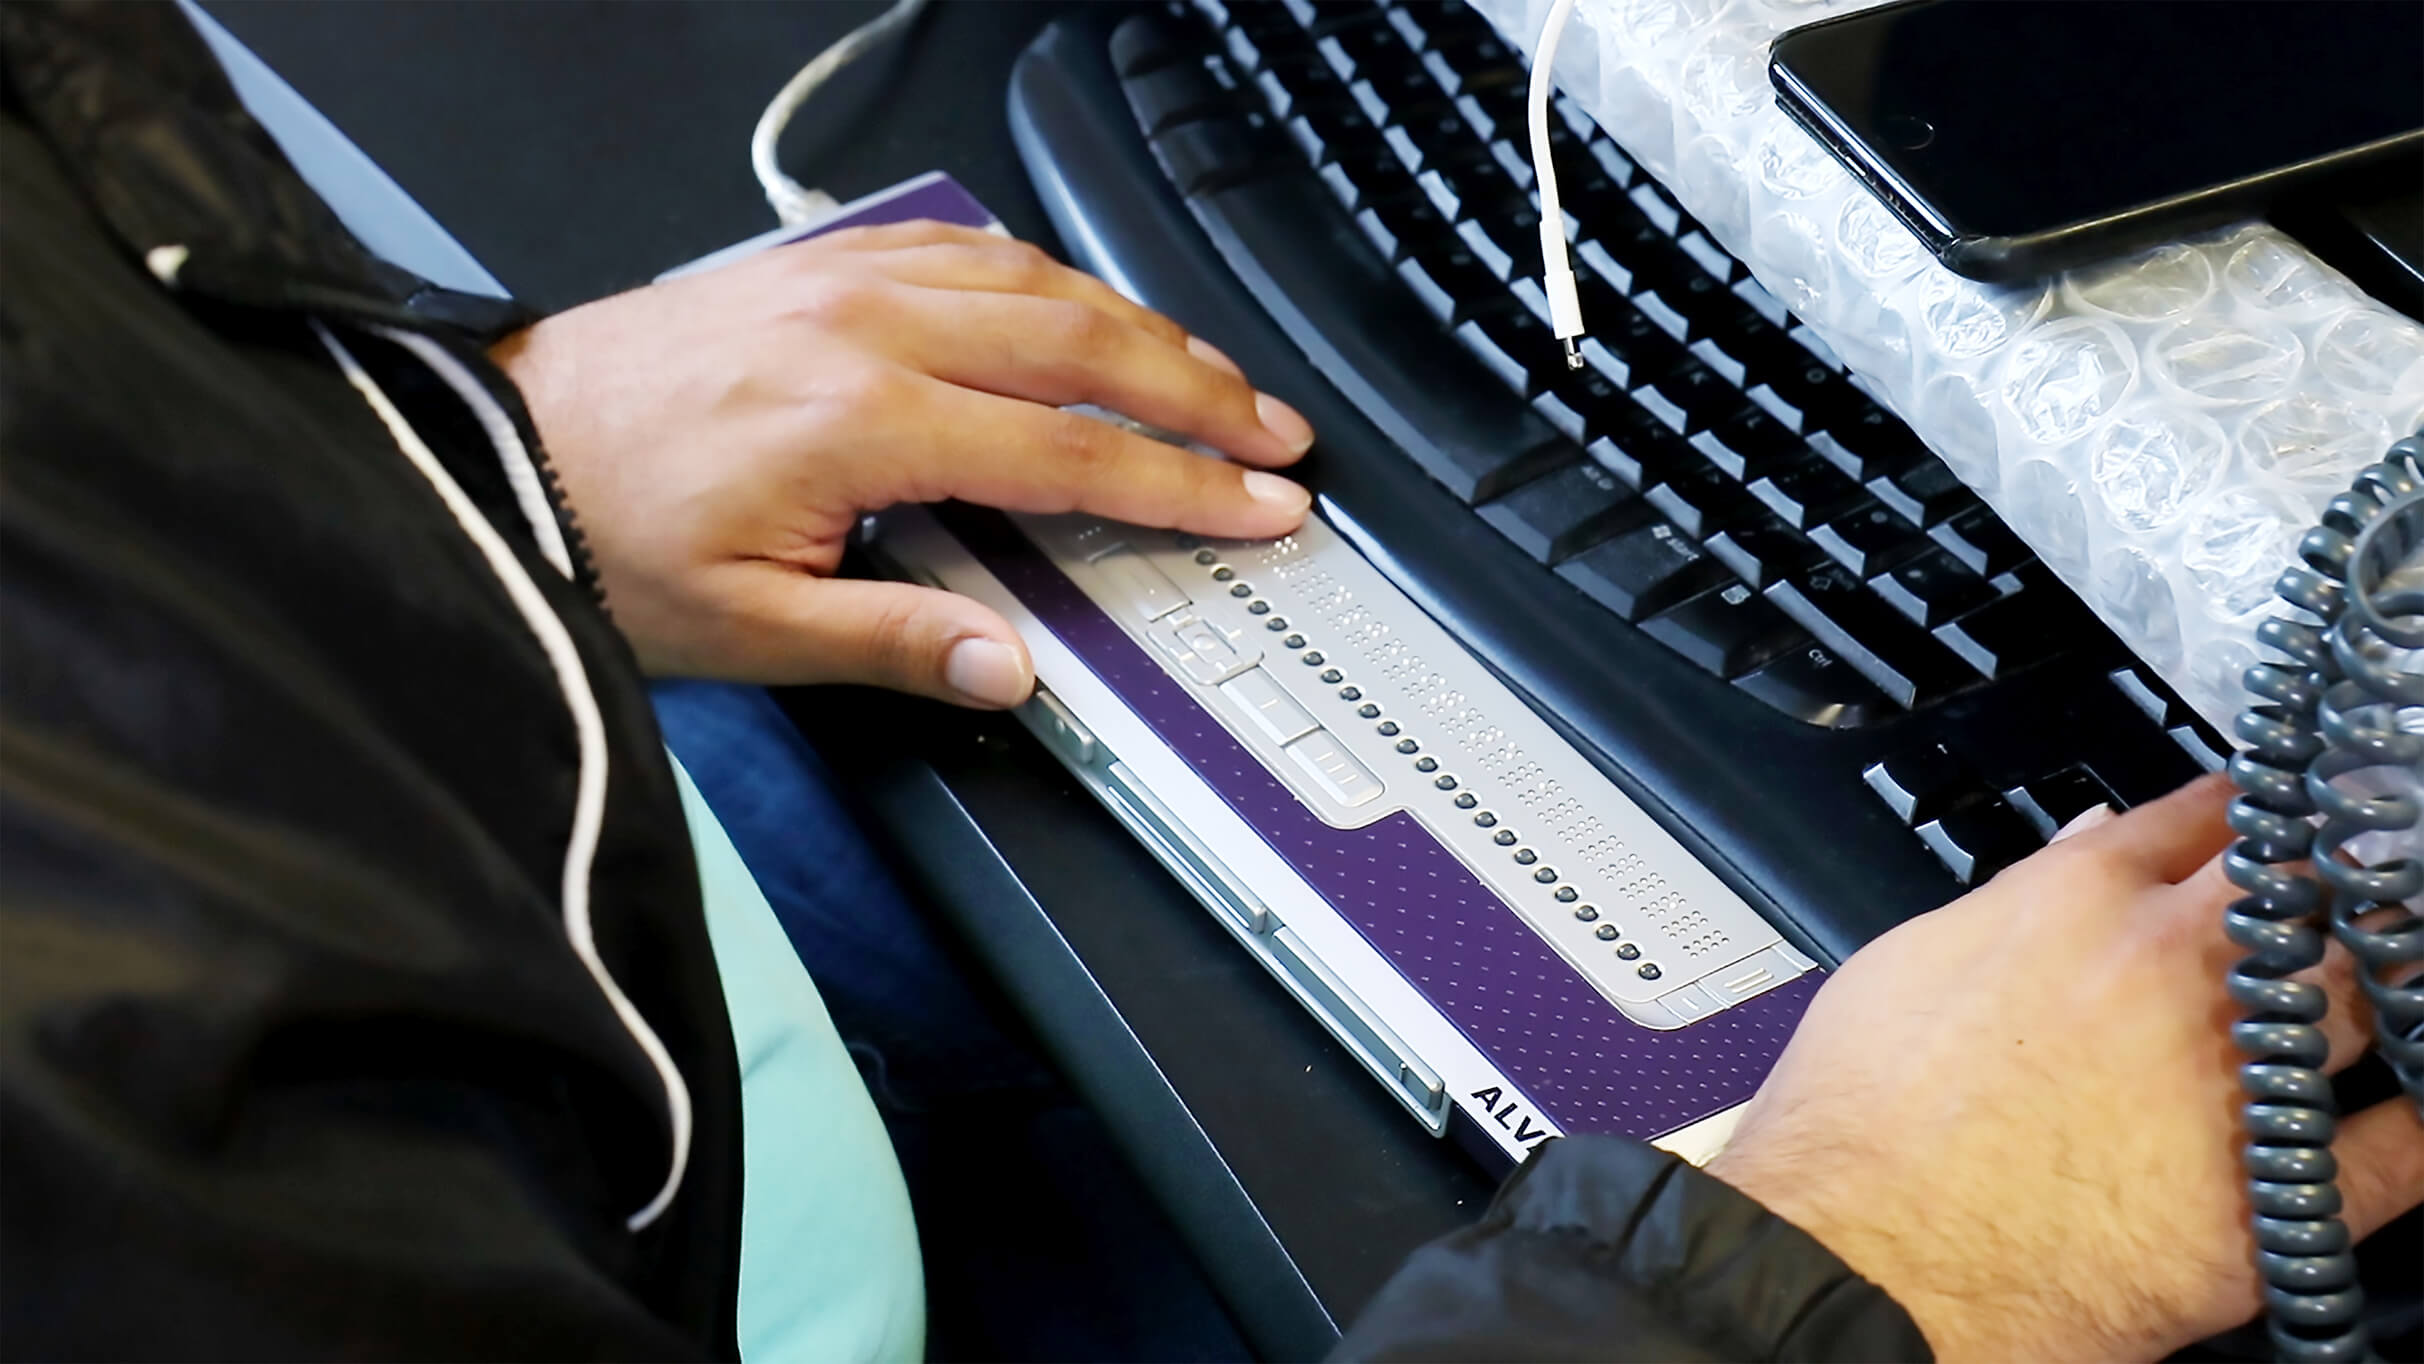 Photo of a man’s hands on a braille display next to a lettered keyboard